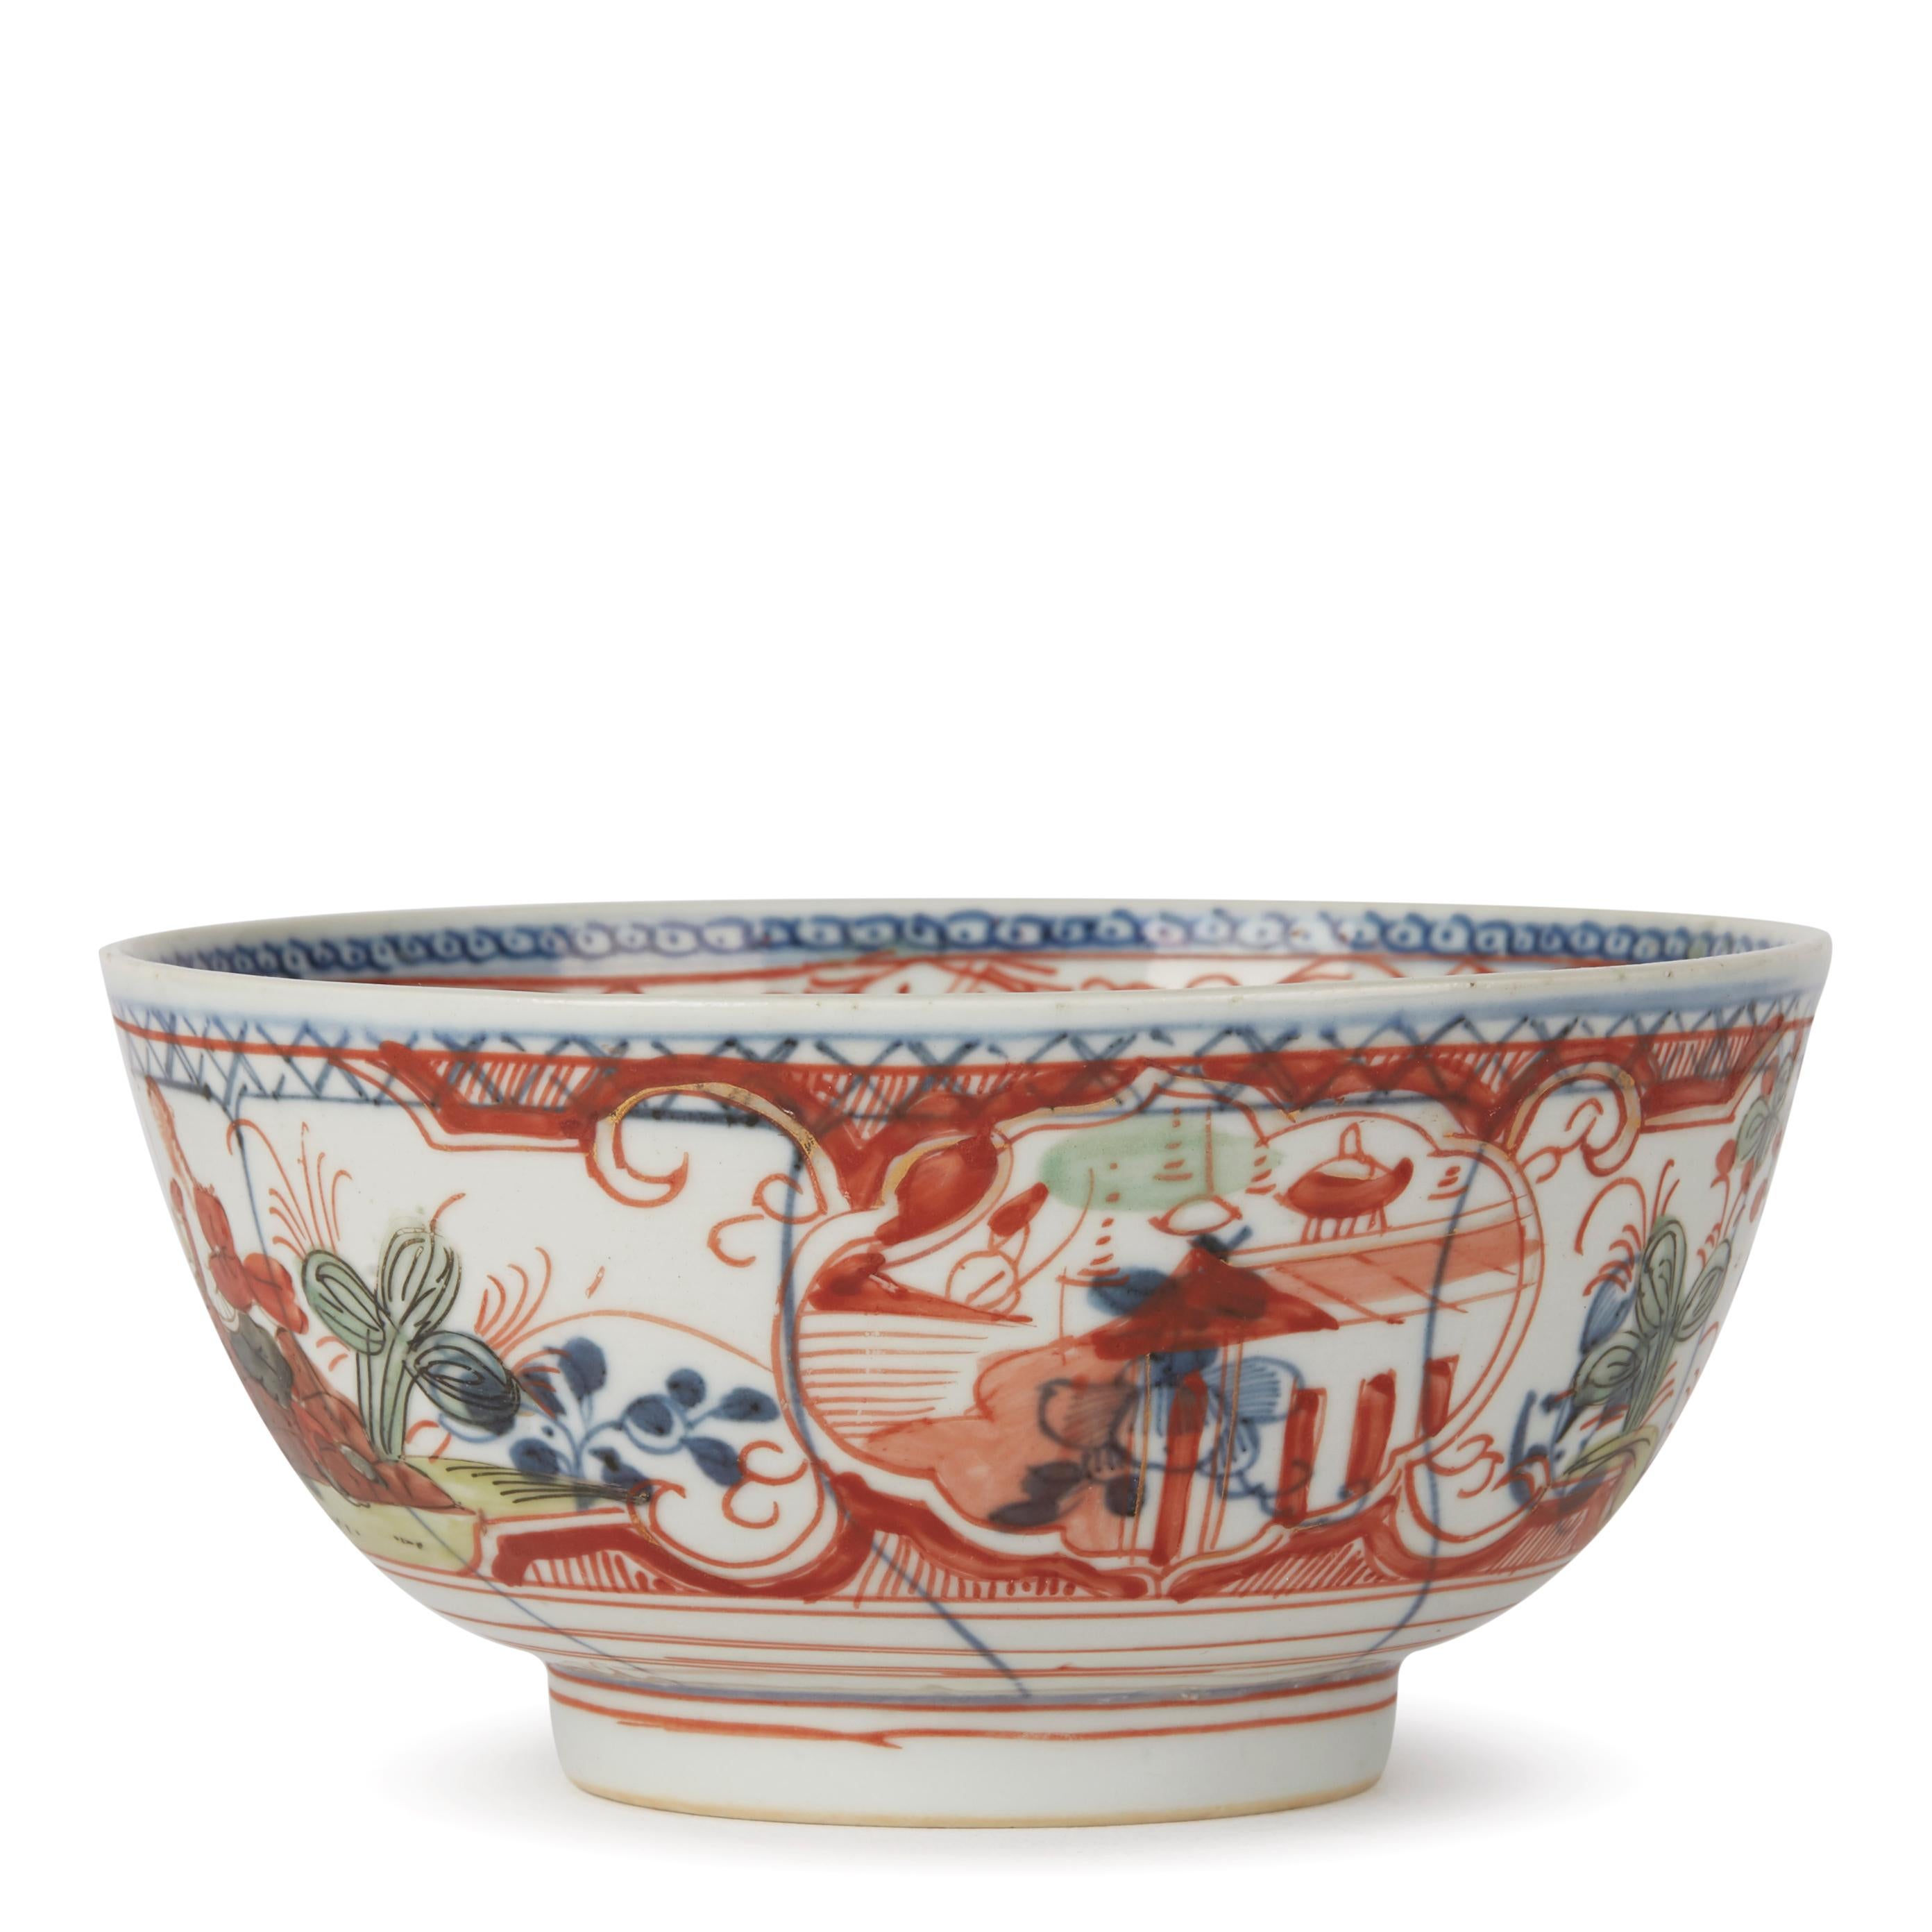 Hand-Painted Chinese Overpainted Porcelain Bowl with Figures, 1720-1740